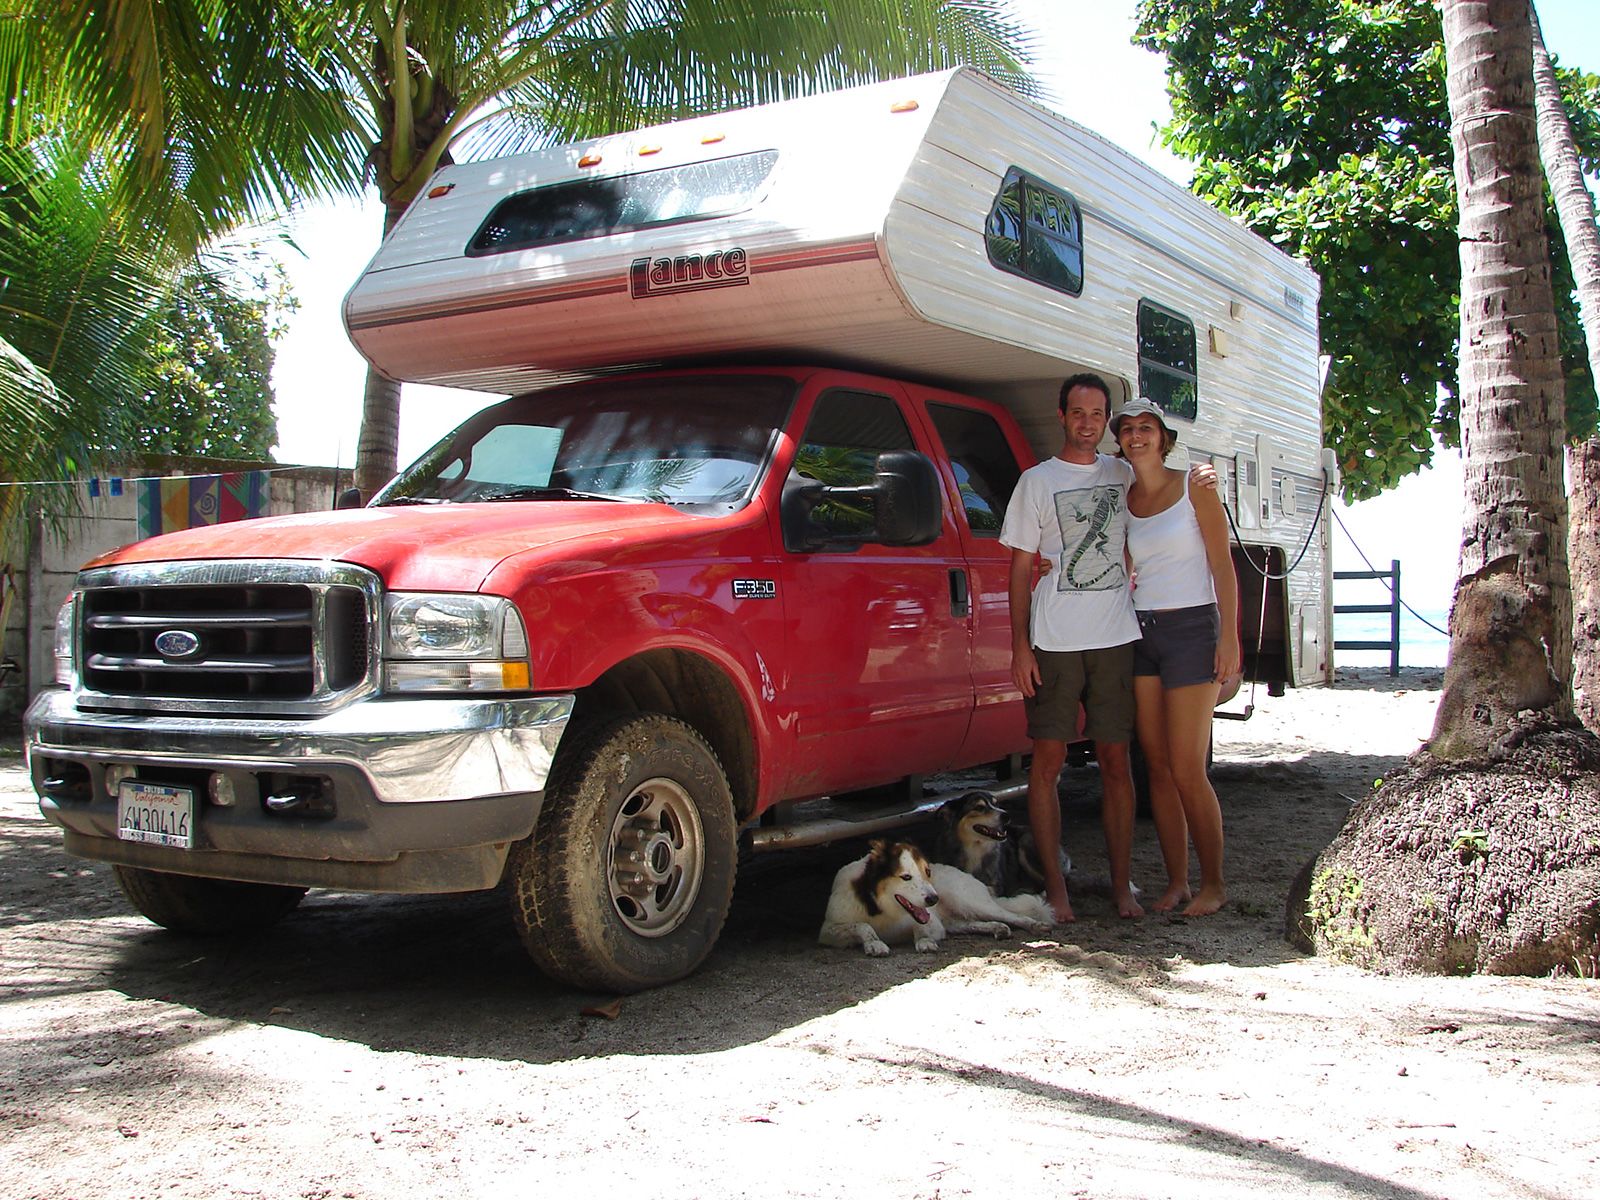 Here's Mark and Liesbet with their two dogs and their campervan in Costa Rica in 2006